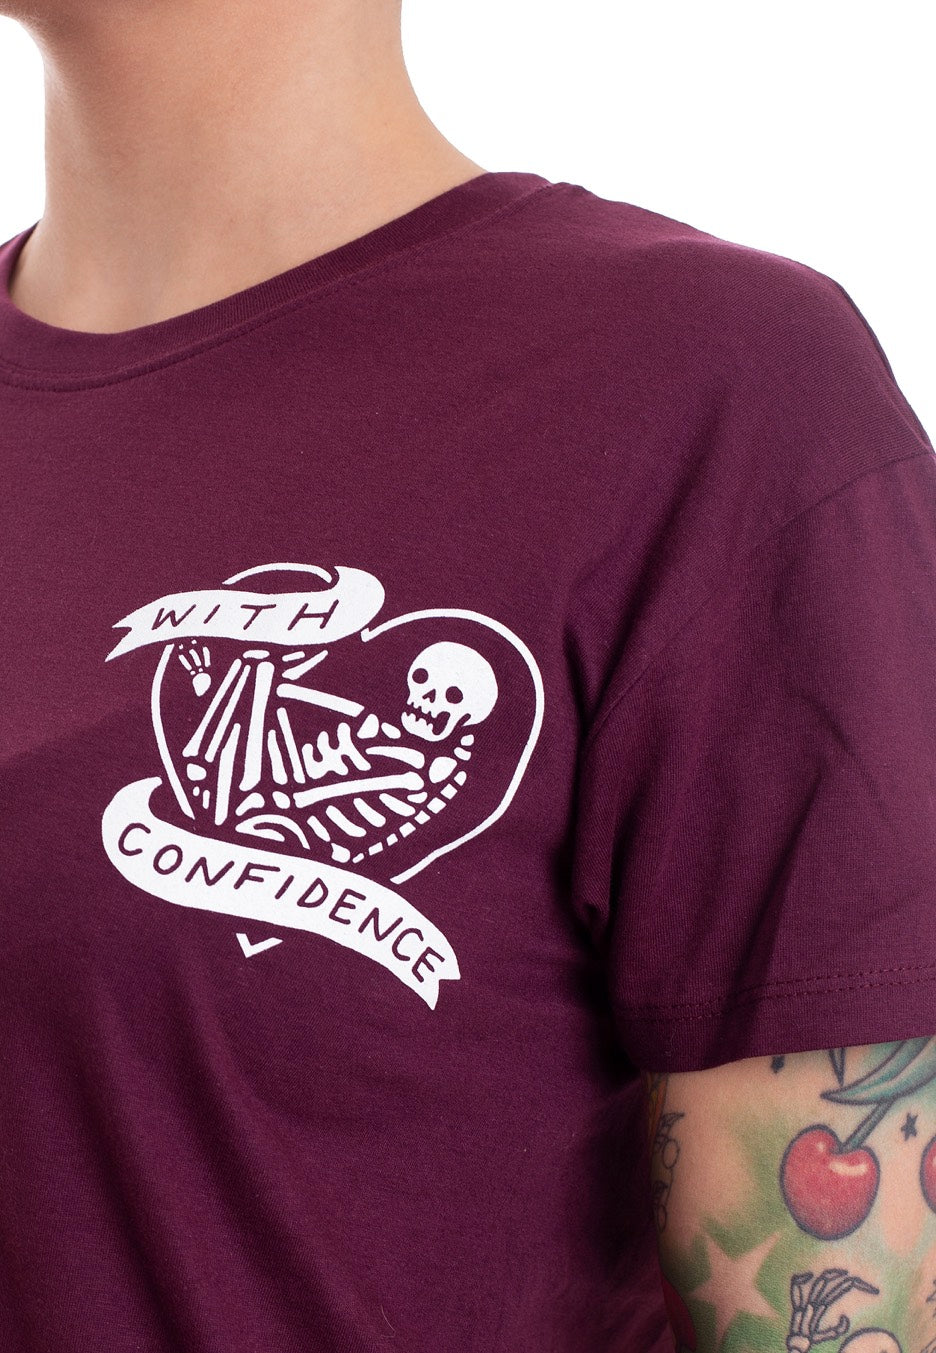 With Confidence - Sink Back Down Maroon - T-Shirt